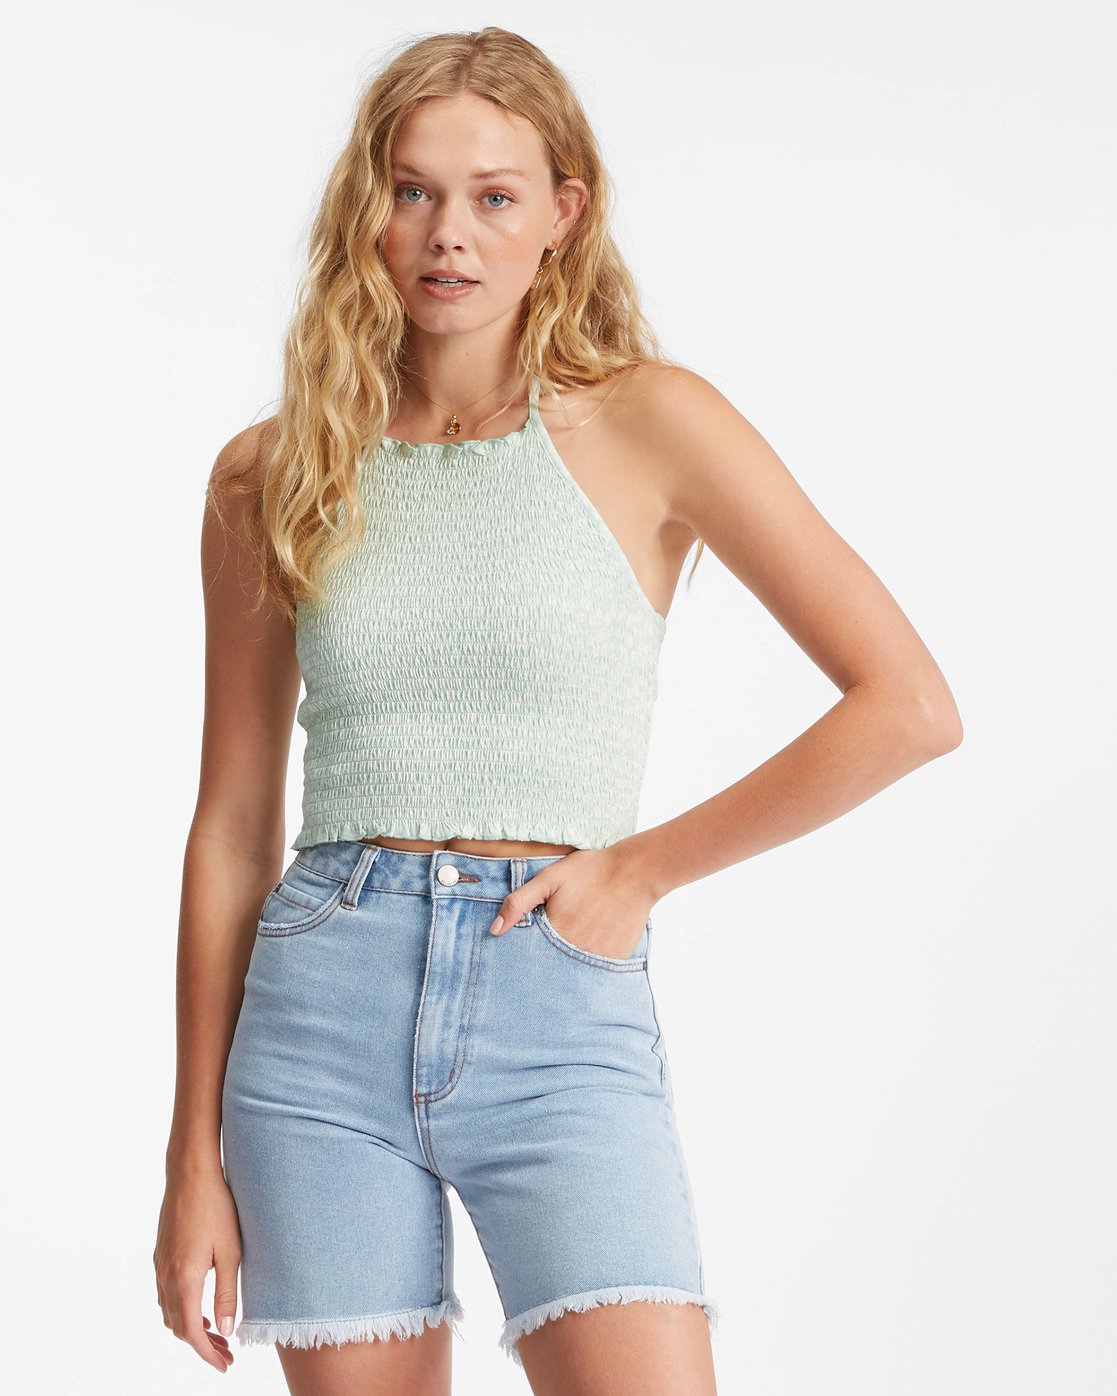 Feels Like Summer Tank Top - Mint To Be